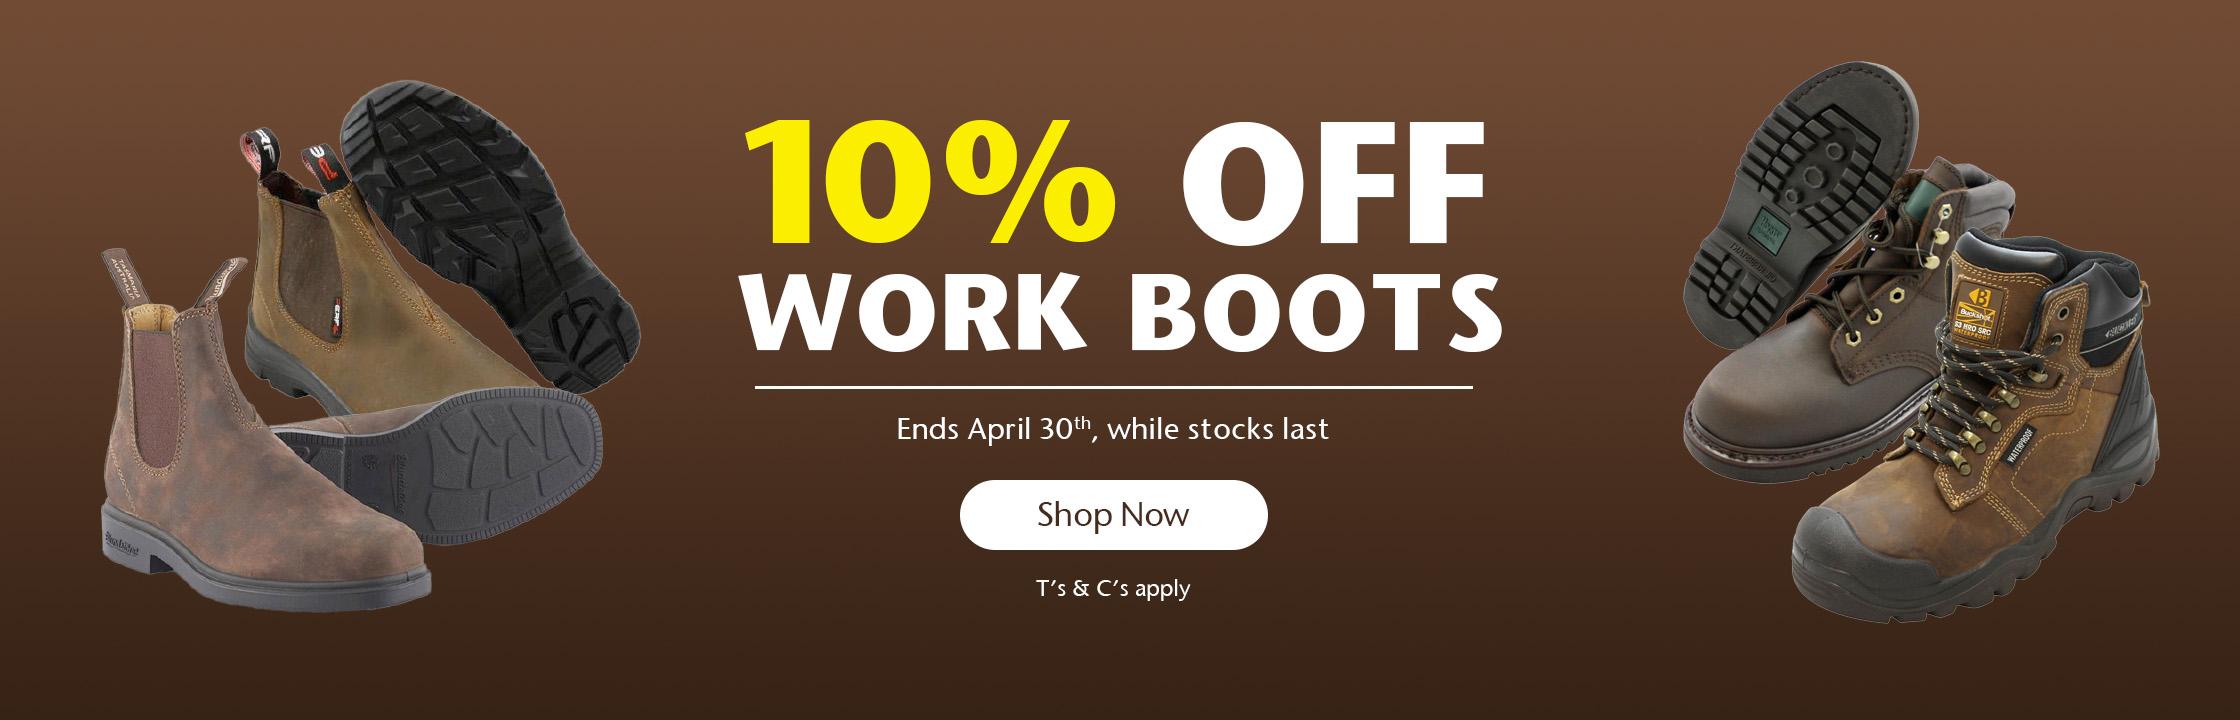 10% OFF Boots April Offer